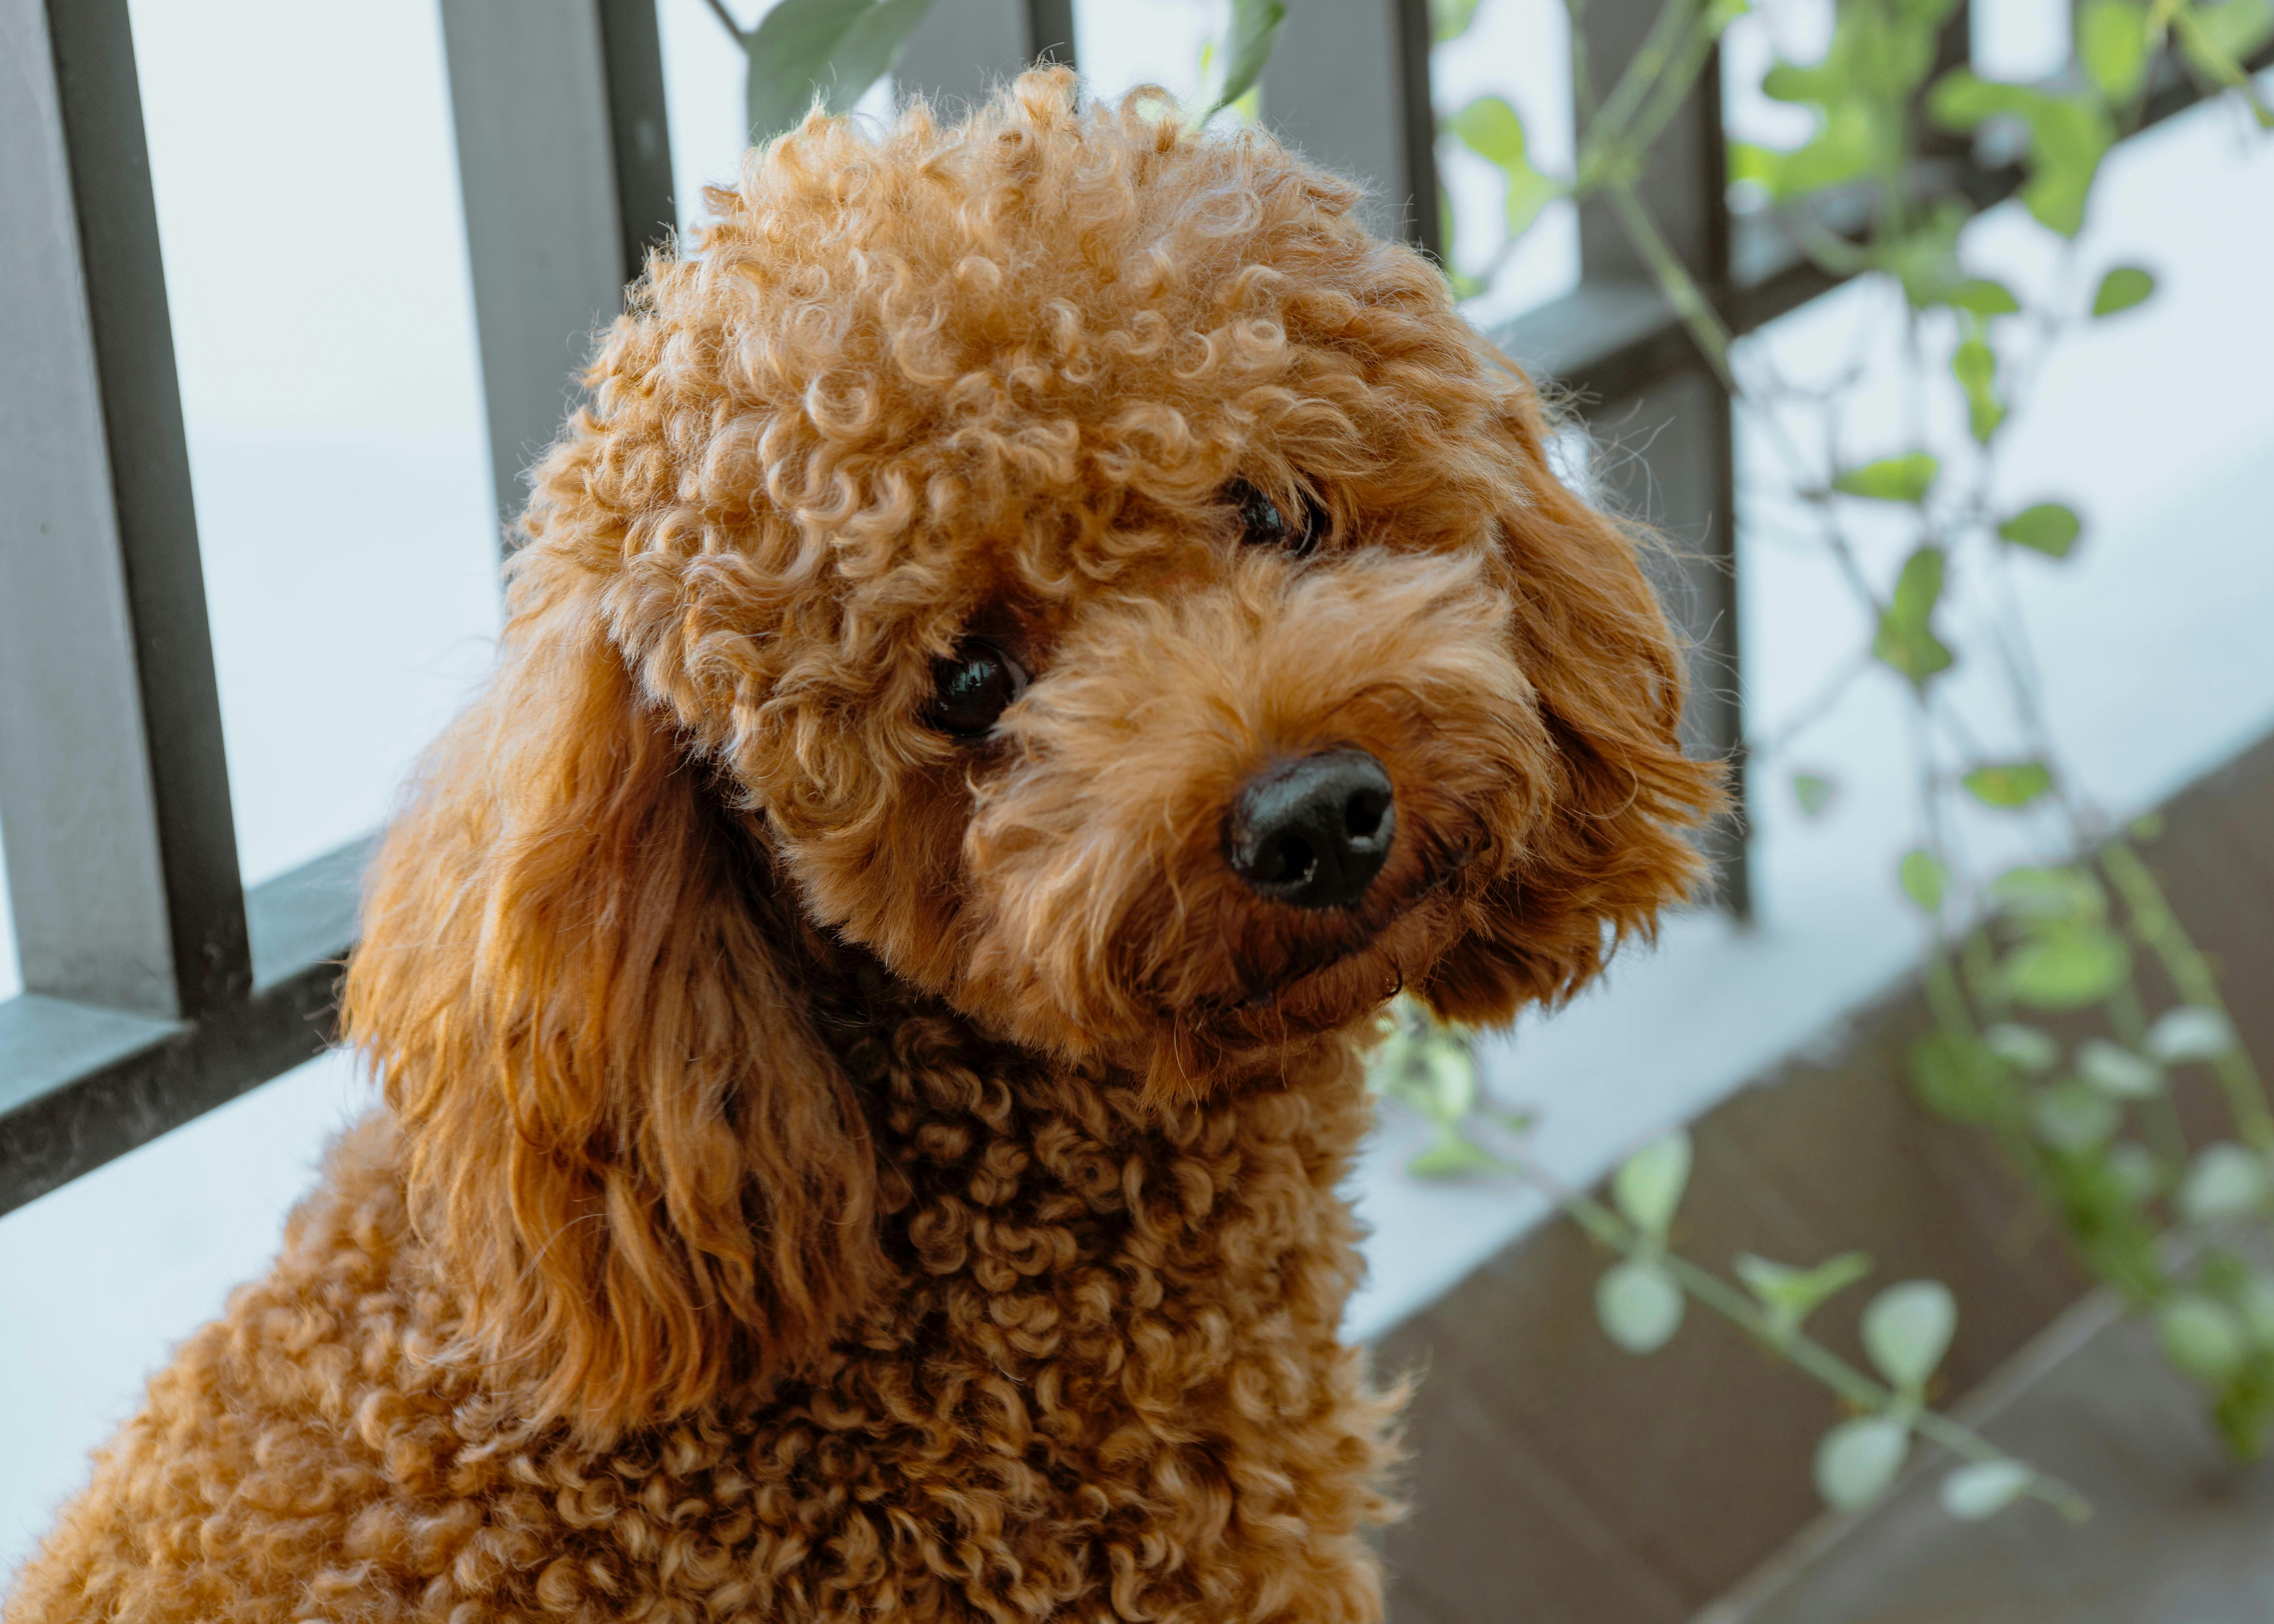 Brown Poodle sitting outside next to a fence.